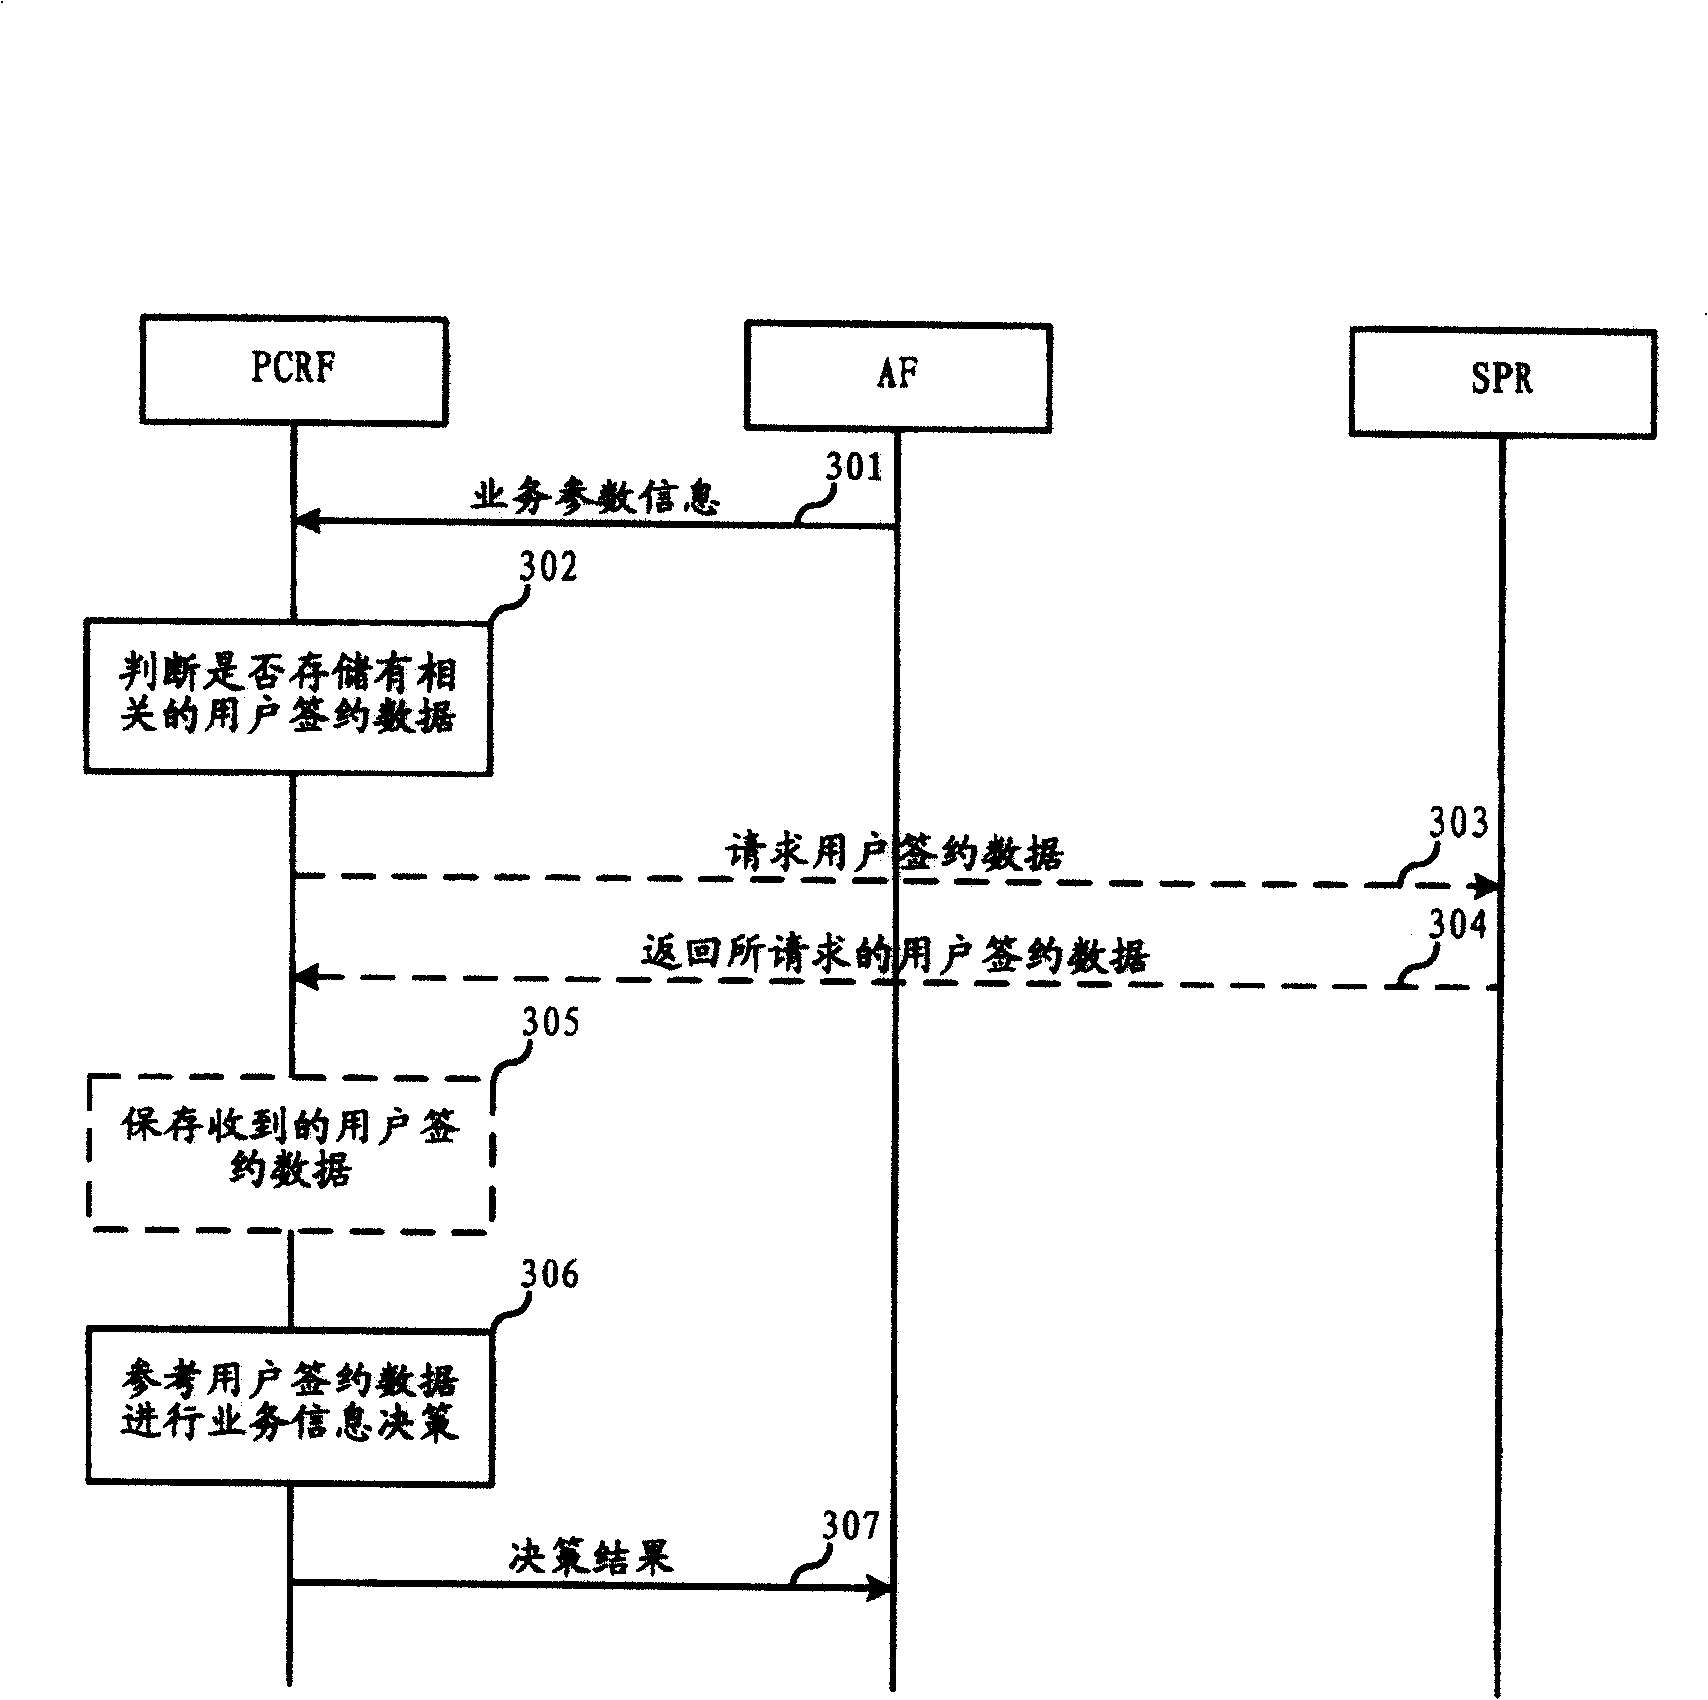 Decision method for service information in mobile communication network